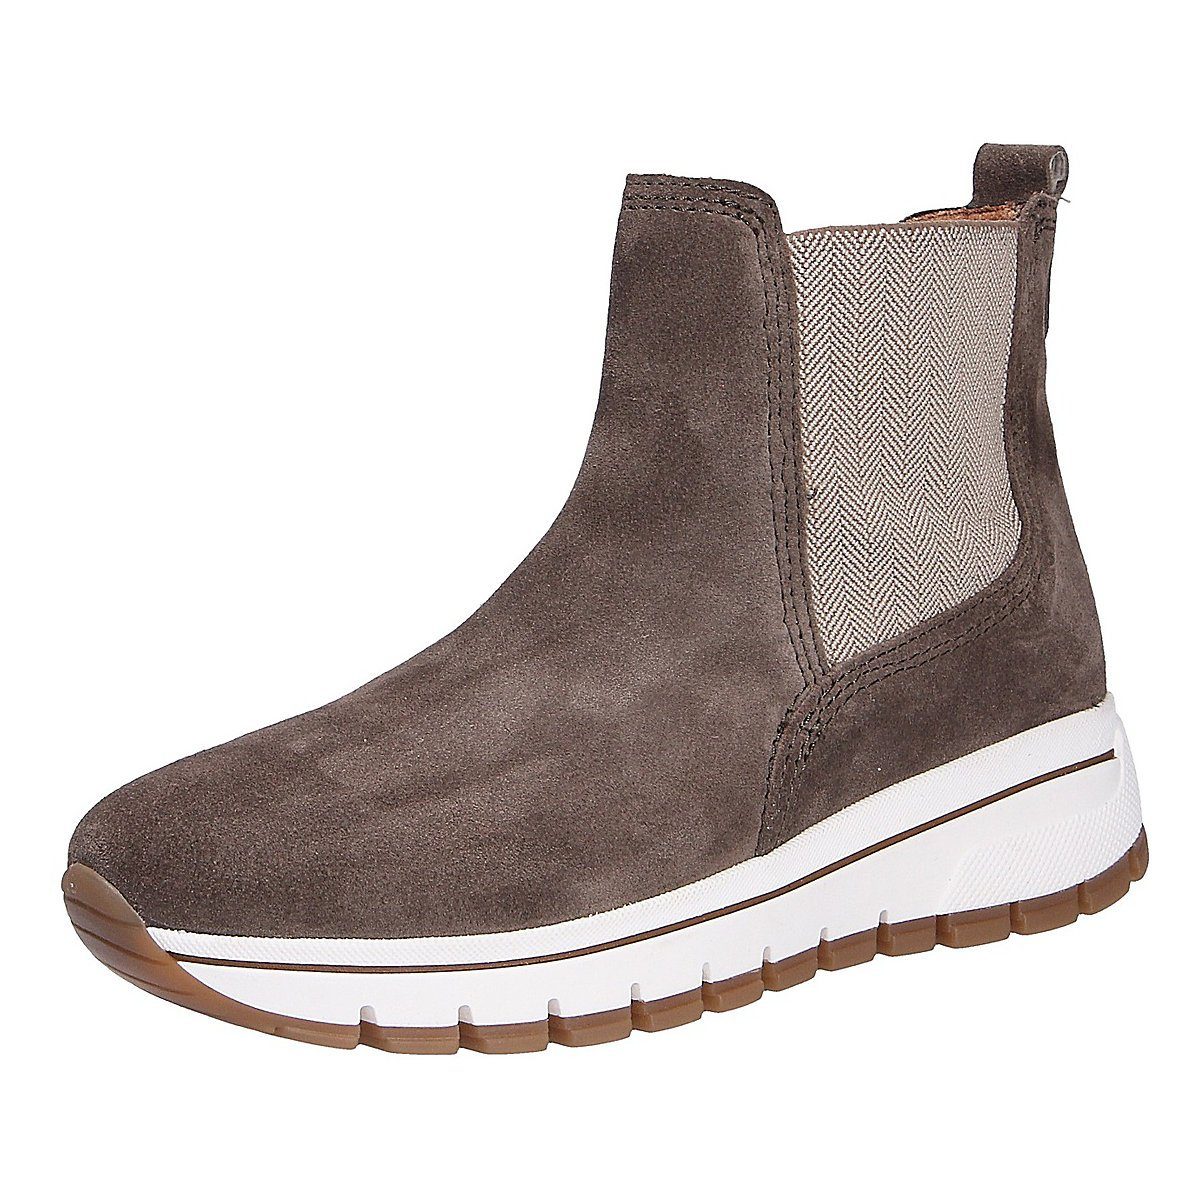 Gabor Chelsea Boots Chelseaboots, Obermaterial: Textil online kaufen | OTTO